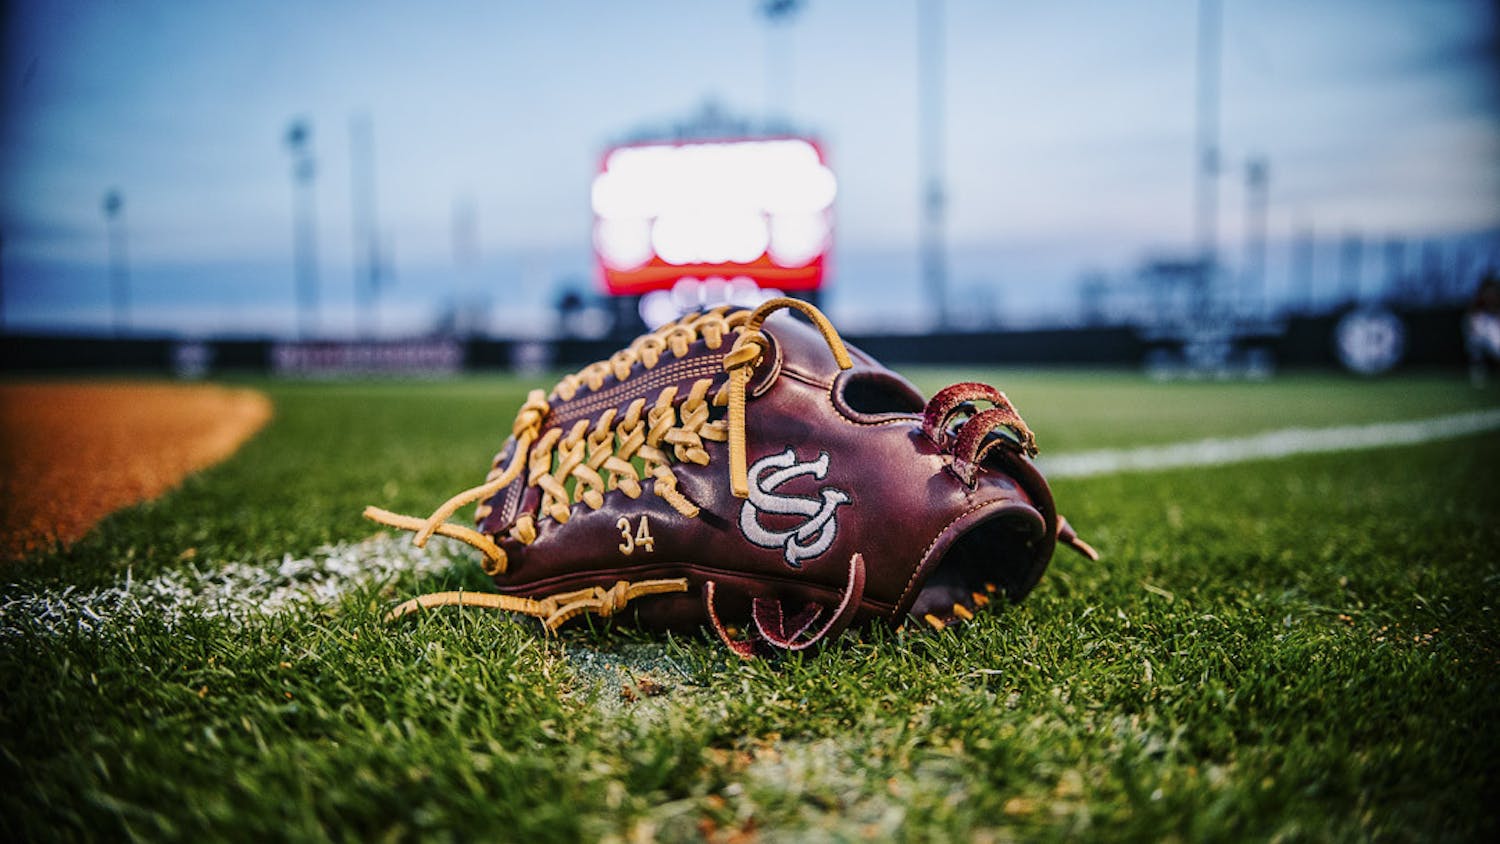 Fifth-year pitcher Rachel Vaughan’s glove sits on the freshly mowed grass at Beckham Field during the matchup between South Carolina and the College of Charleston on February 15, 2023. The Gamecocks beat the Cougars 8-0. 